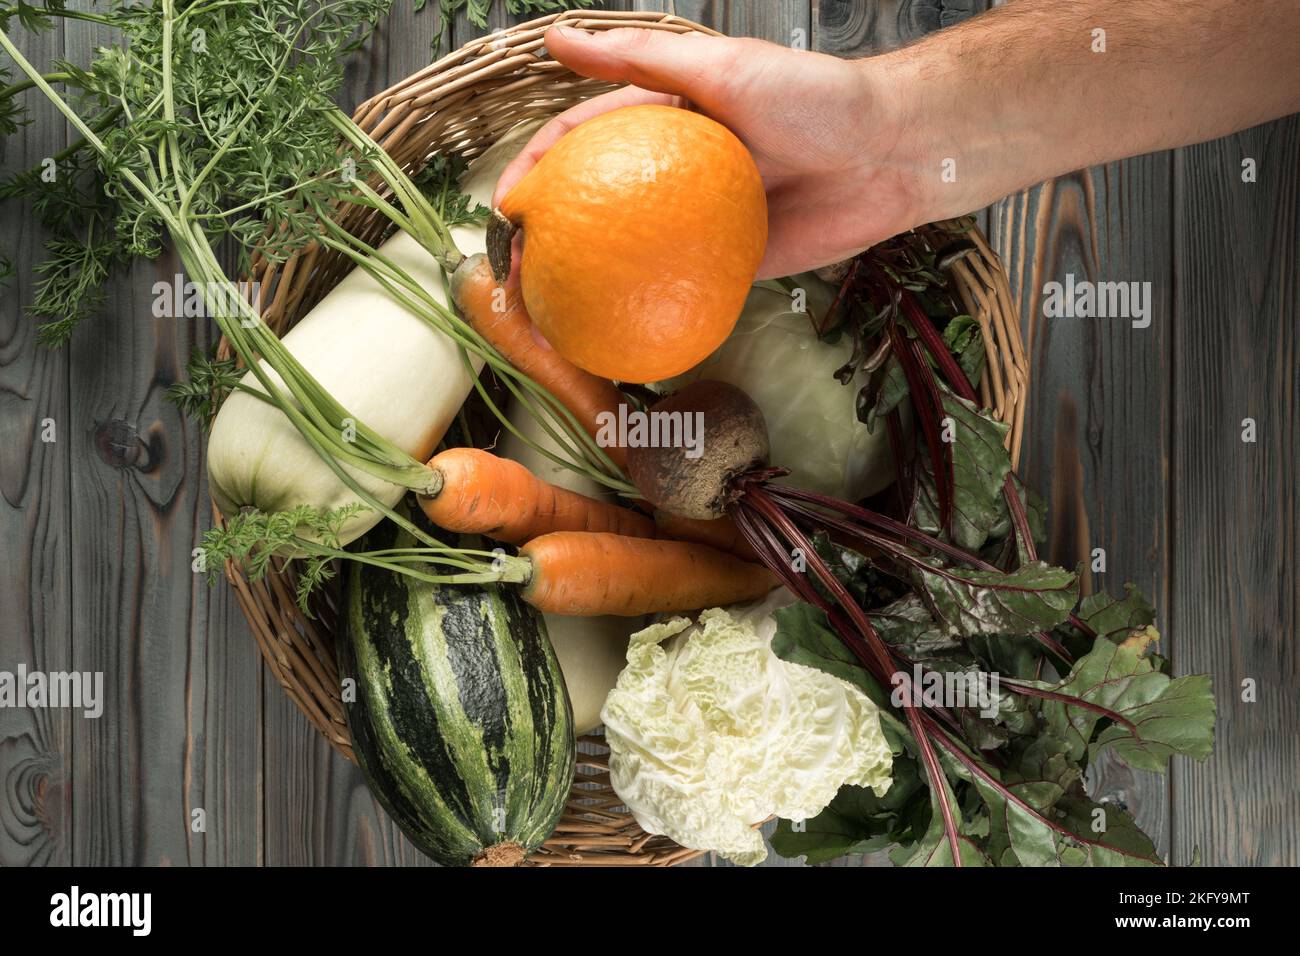 Unrecognizable cropped man hand holding little orange pumpkin against woven basket of tasty, juicy raw vegetables on wooden table. Raw food unpack Stock Photo